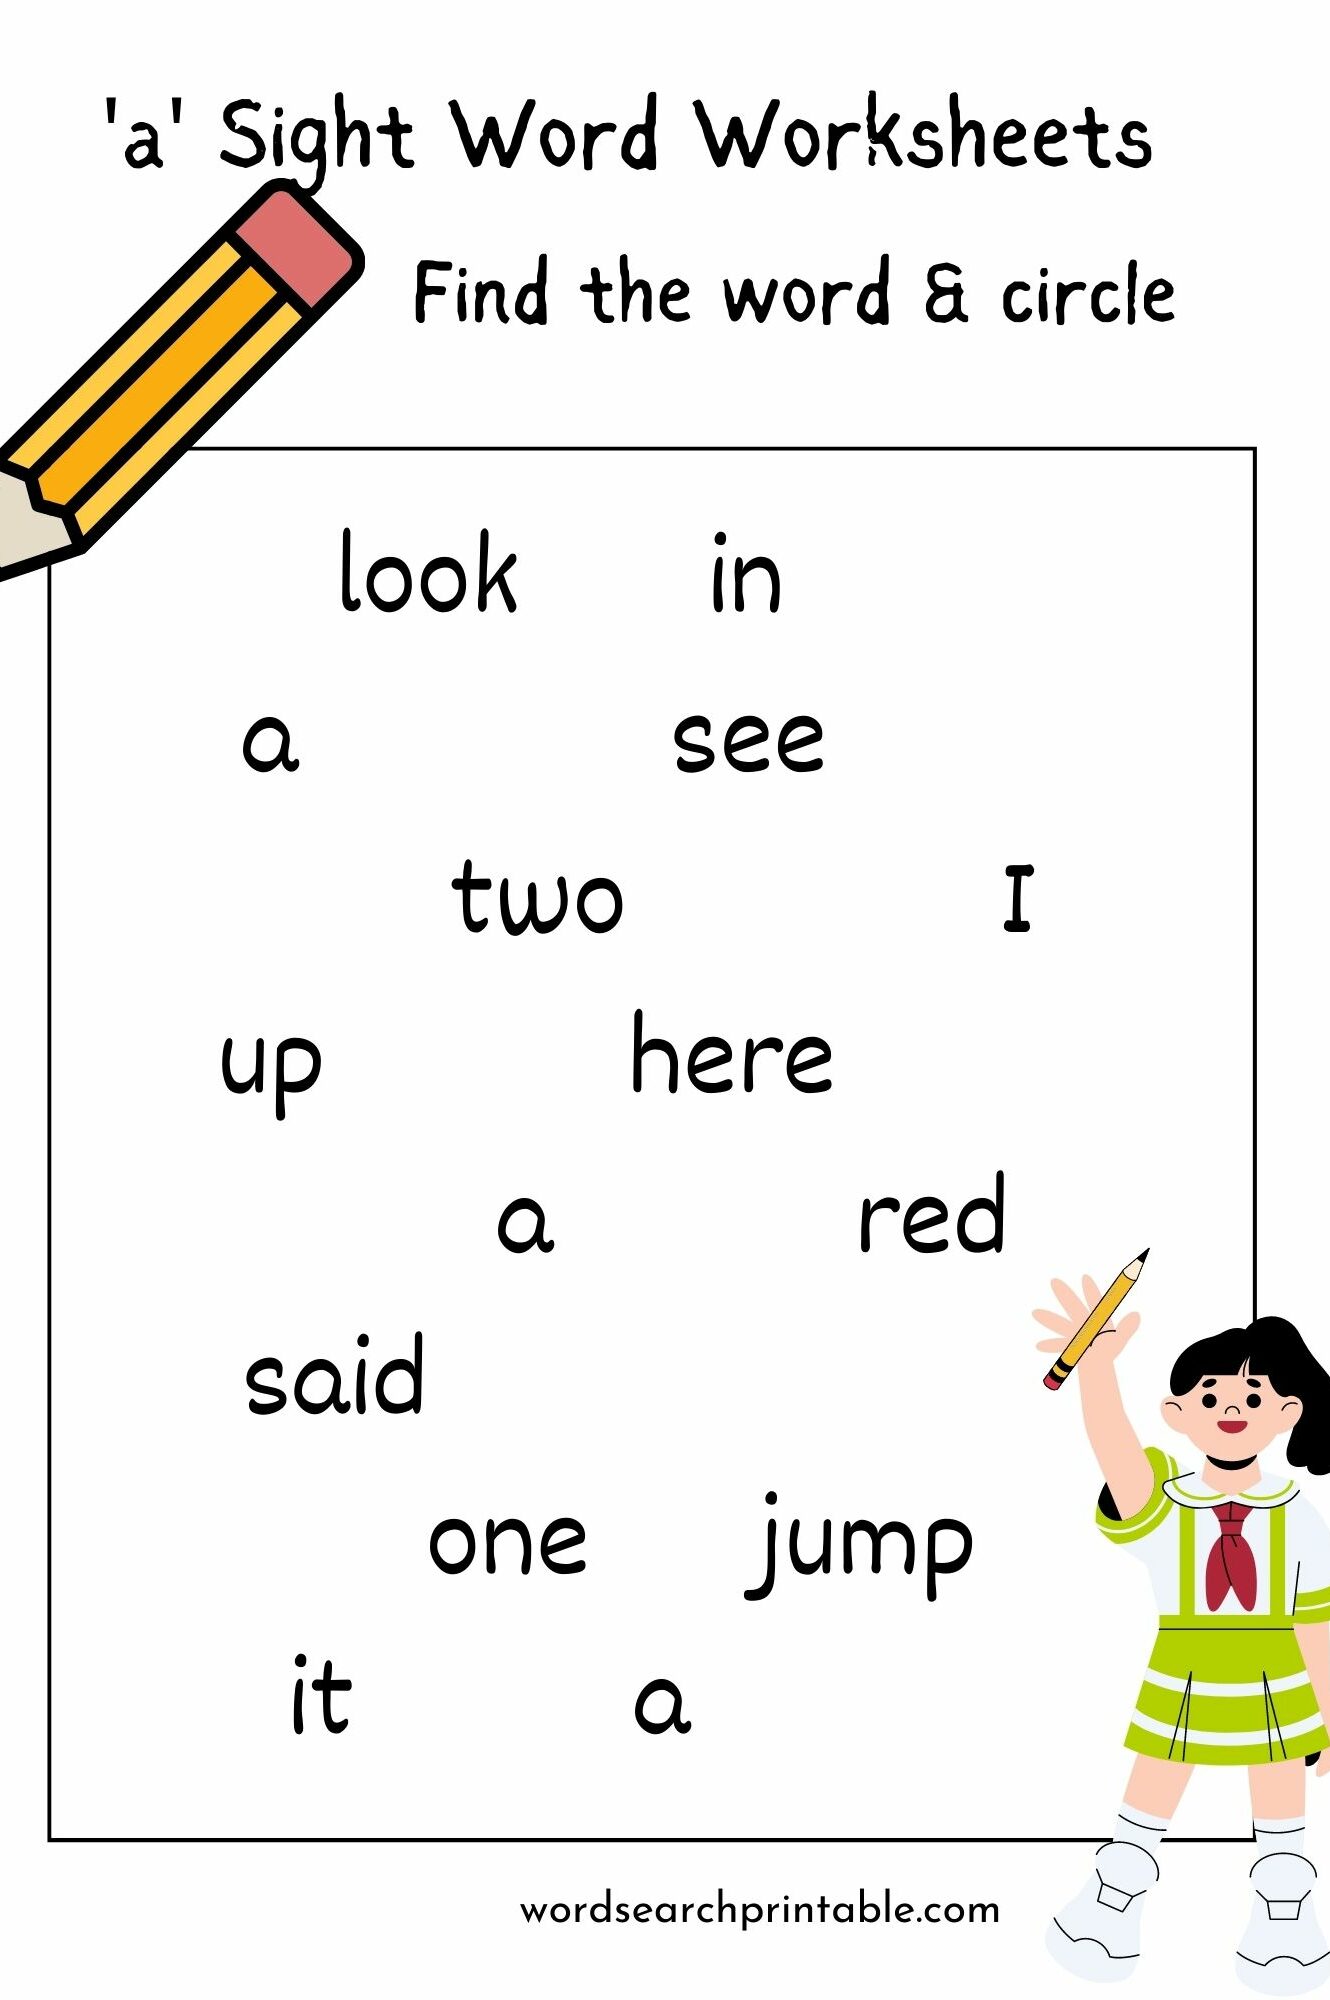 Find the sight word 'A' and circle it